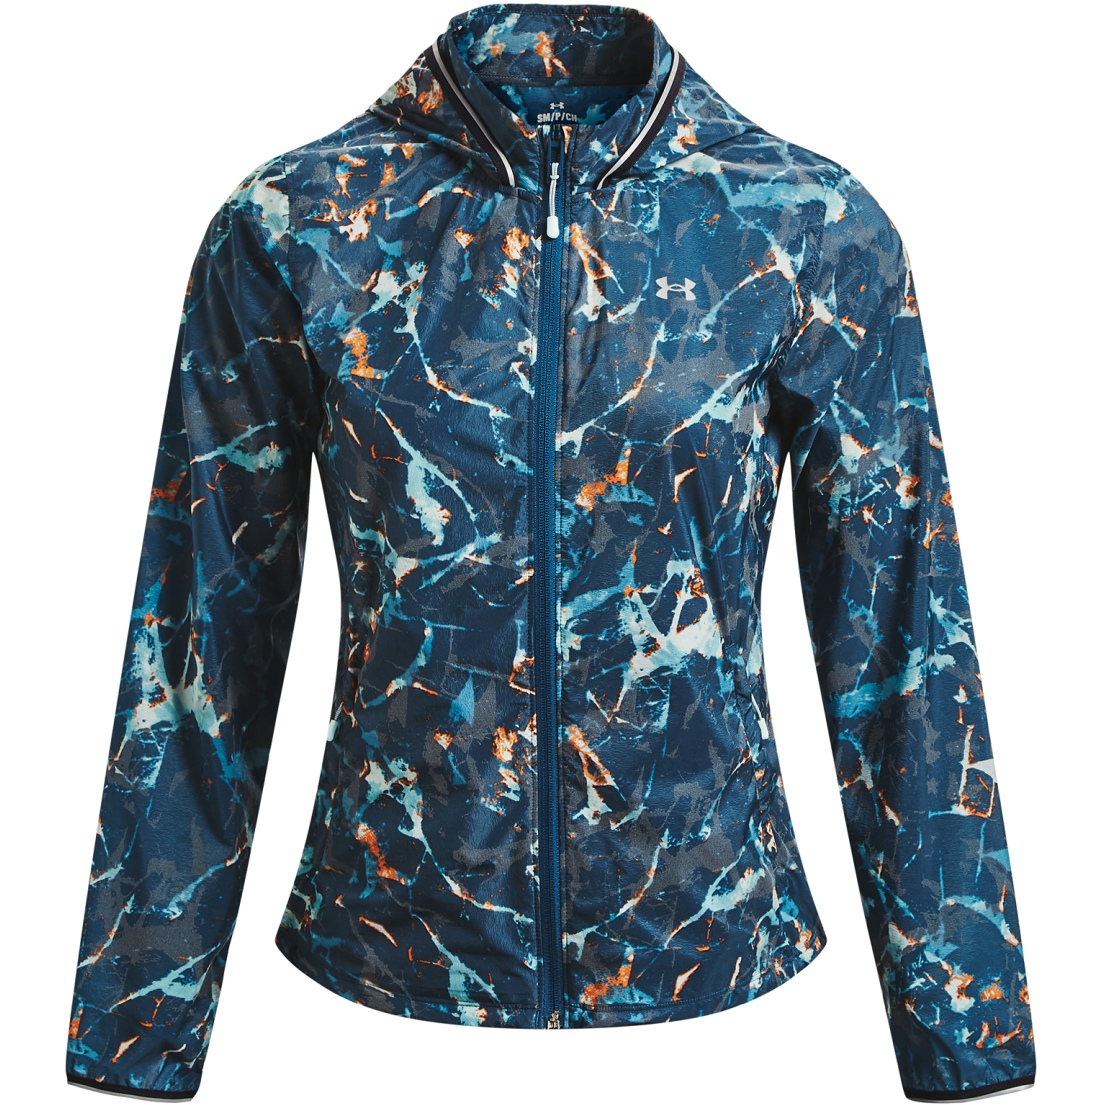 Image of Under Armour Women's UA Storm OutRun The Cold Jacket - Petrol Blue/Black/Reflective